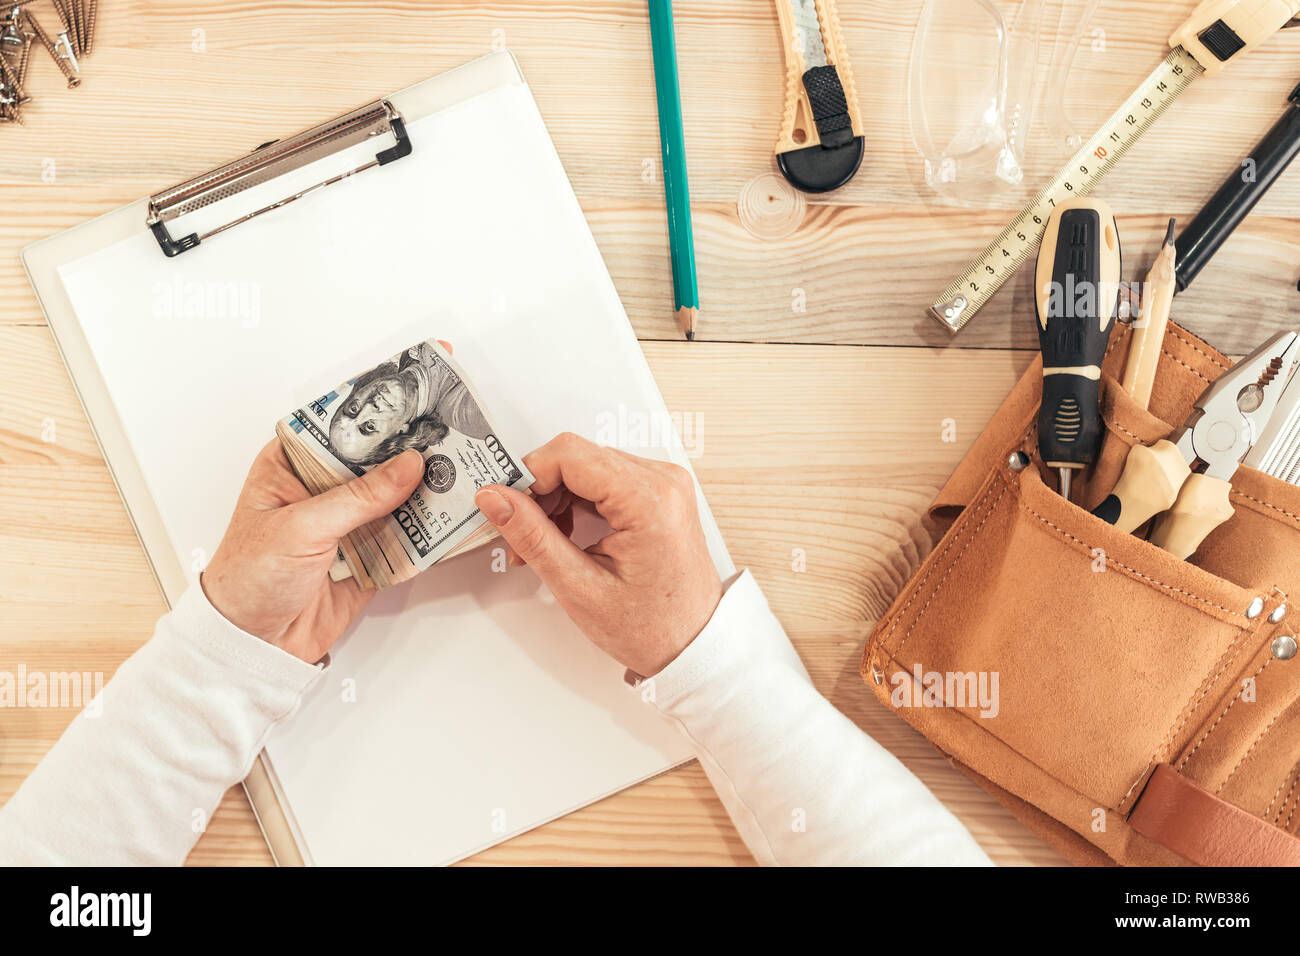 Female carpenter counting money, top view of hands holding US dollar paper currency Stock Photo